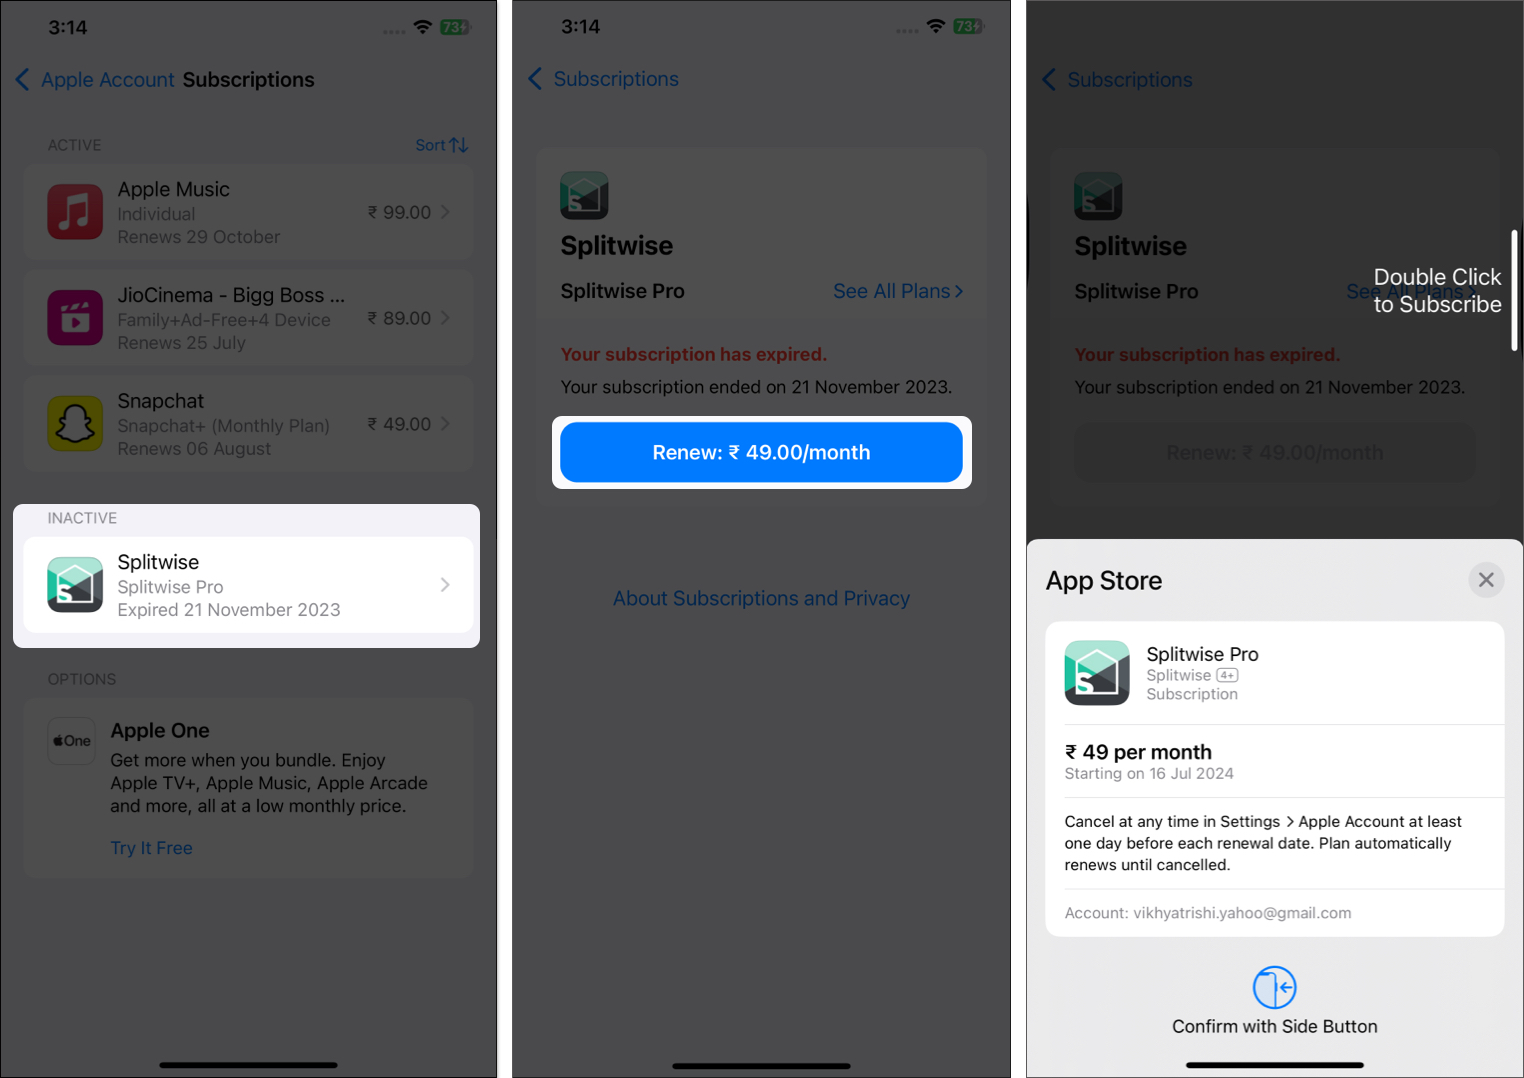 Renew button in the iPhone Settings and App Store to renew a subscription.